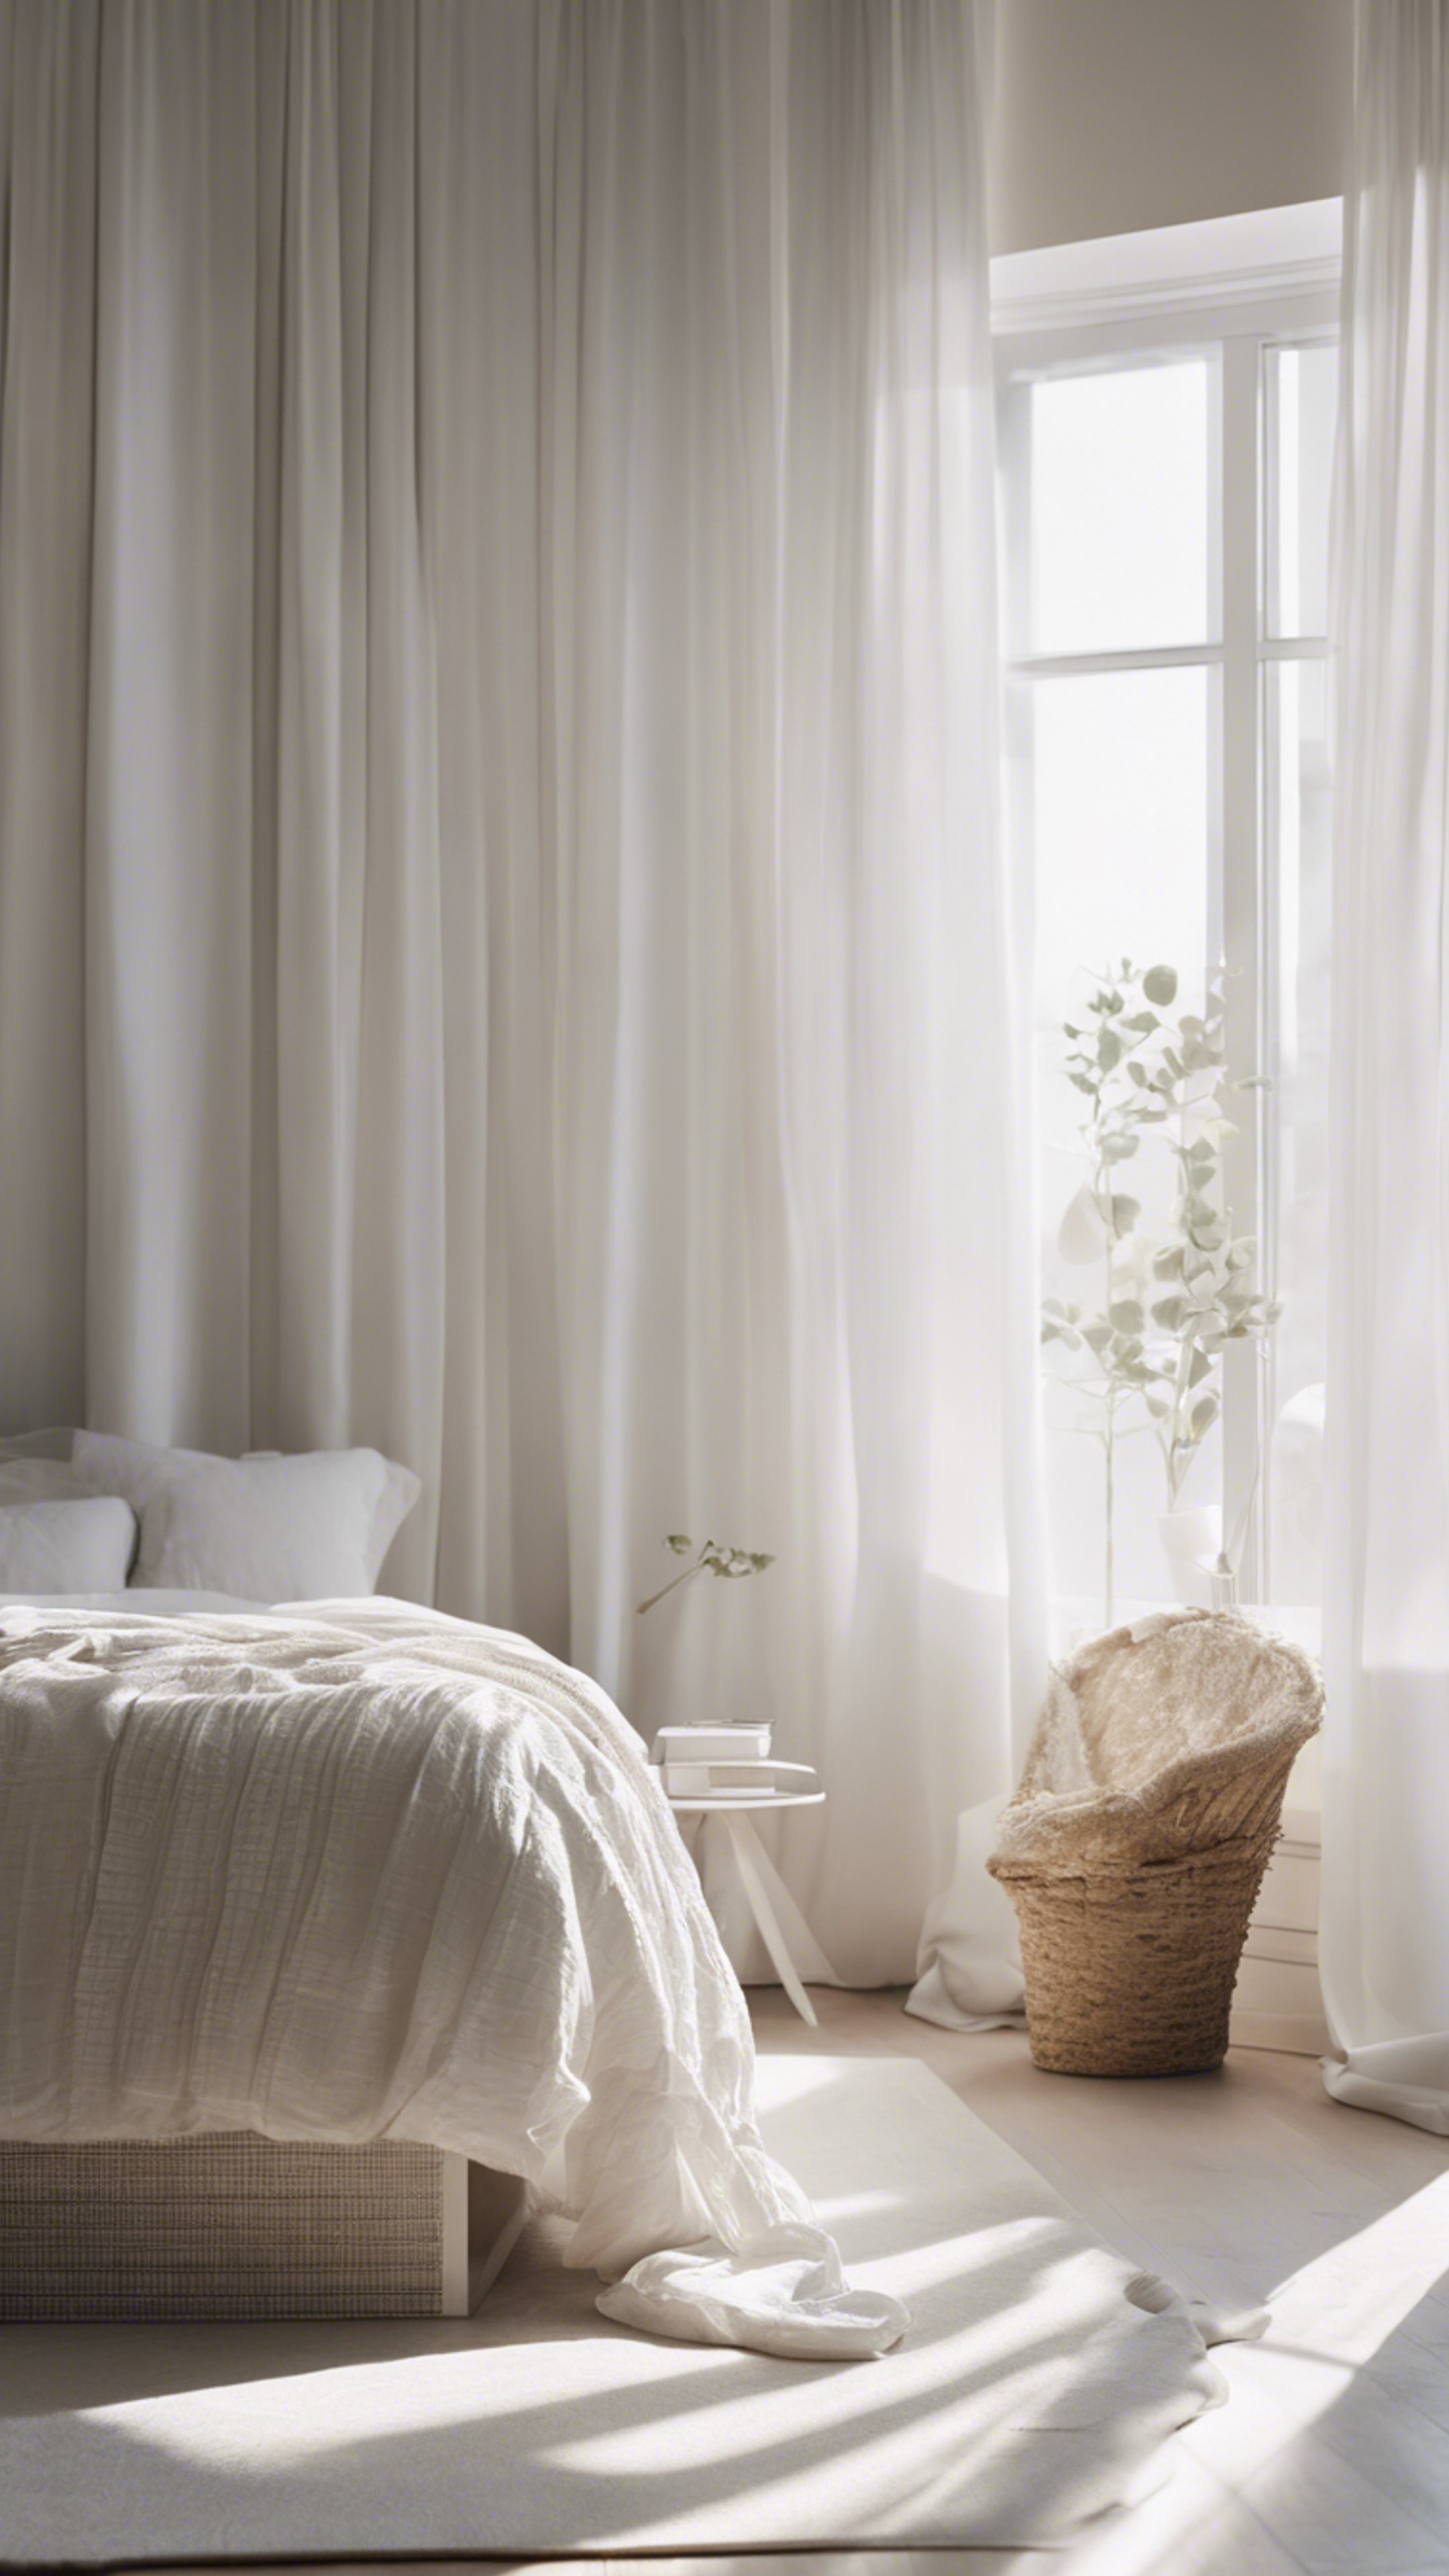 A serene white bedroom with a minimalist aesthetic, sunlight streaming through sheer curtains Papel de parede[e50a9fa27884450ea562]